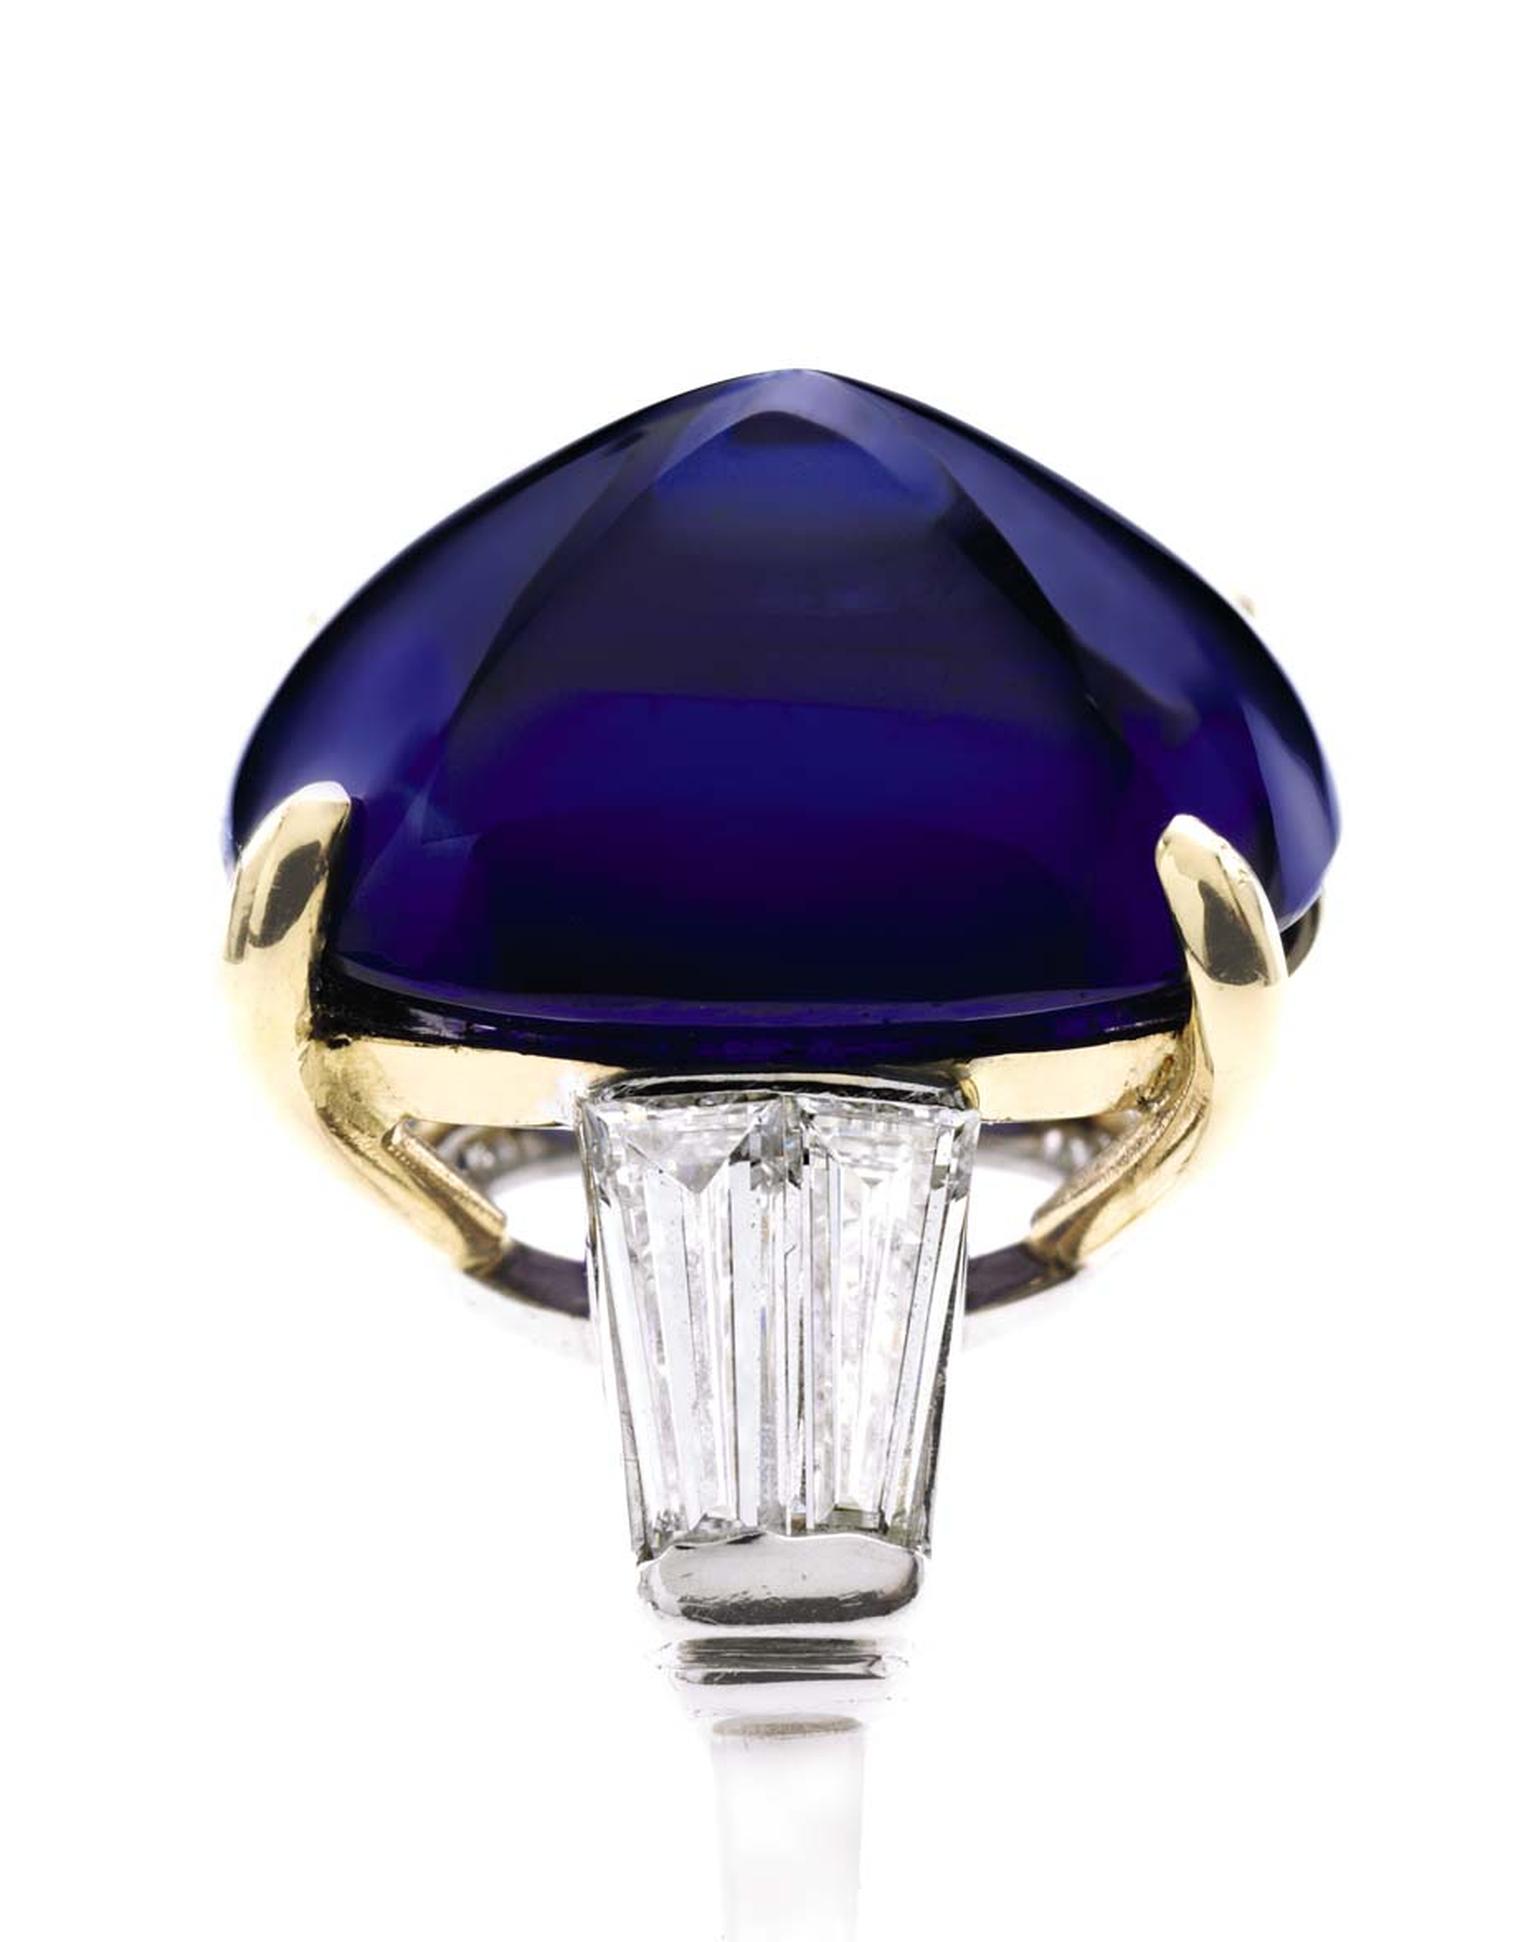 Important platinum and gold ring set with a 9.94ct sugarloaf cabochon sapphire, accompanied by diamonds on each shoulder (estimate: $700,000-$1 million).